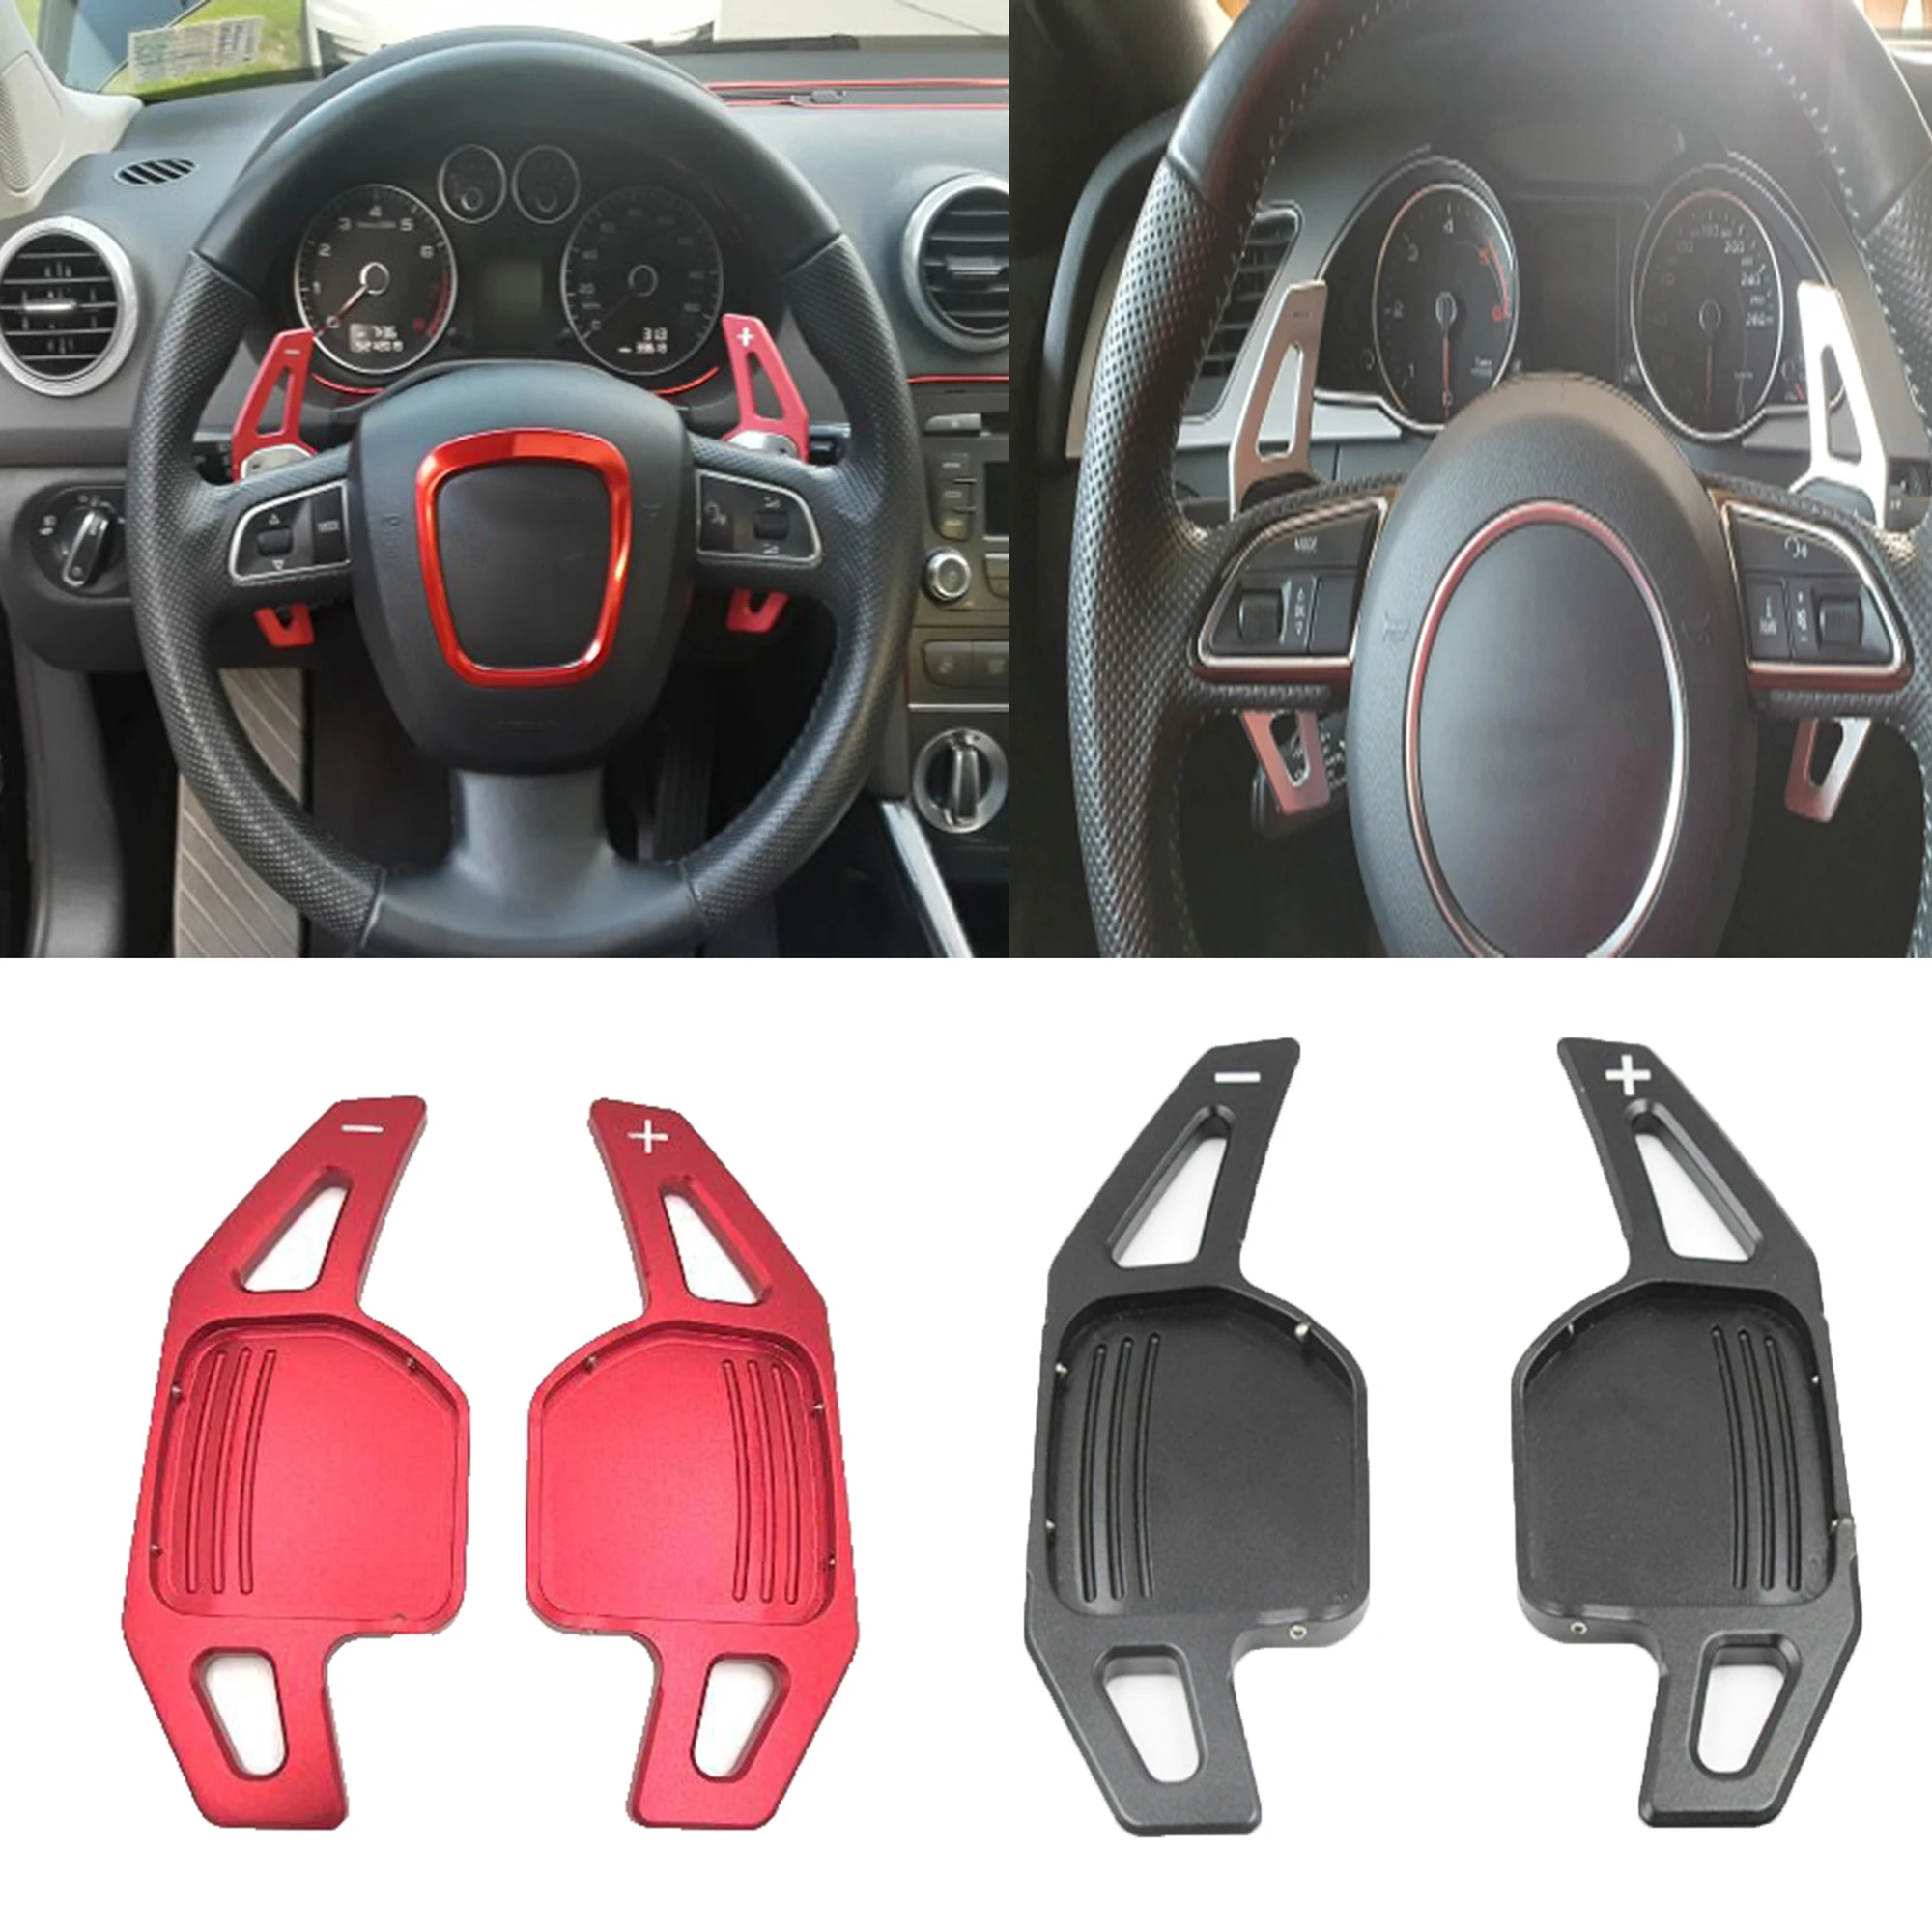 

Car Replacement For Audi A3 A4 A4L A5 A6 A7 A8 Q3 Q5 Q7 TT S3 R8 Car Steering Wheel Shift Paddle Shifter Extension